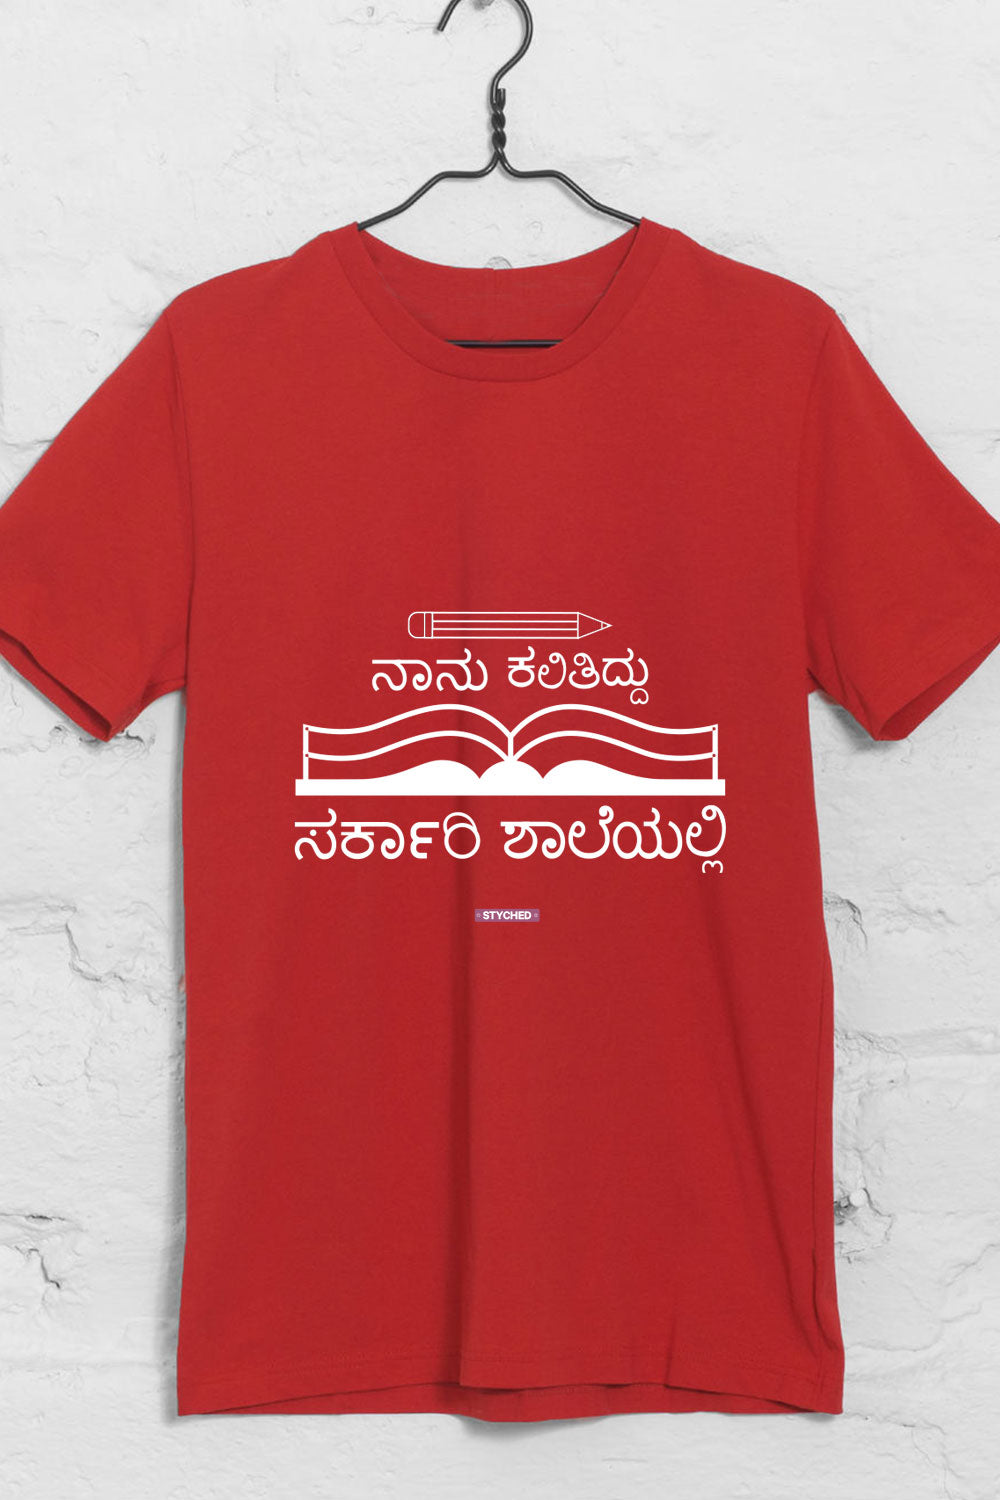 Save Govt. Schools Movement Tee - Styched in India Graphic T-Shirt Red Color